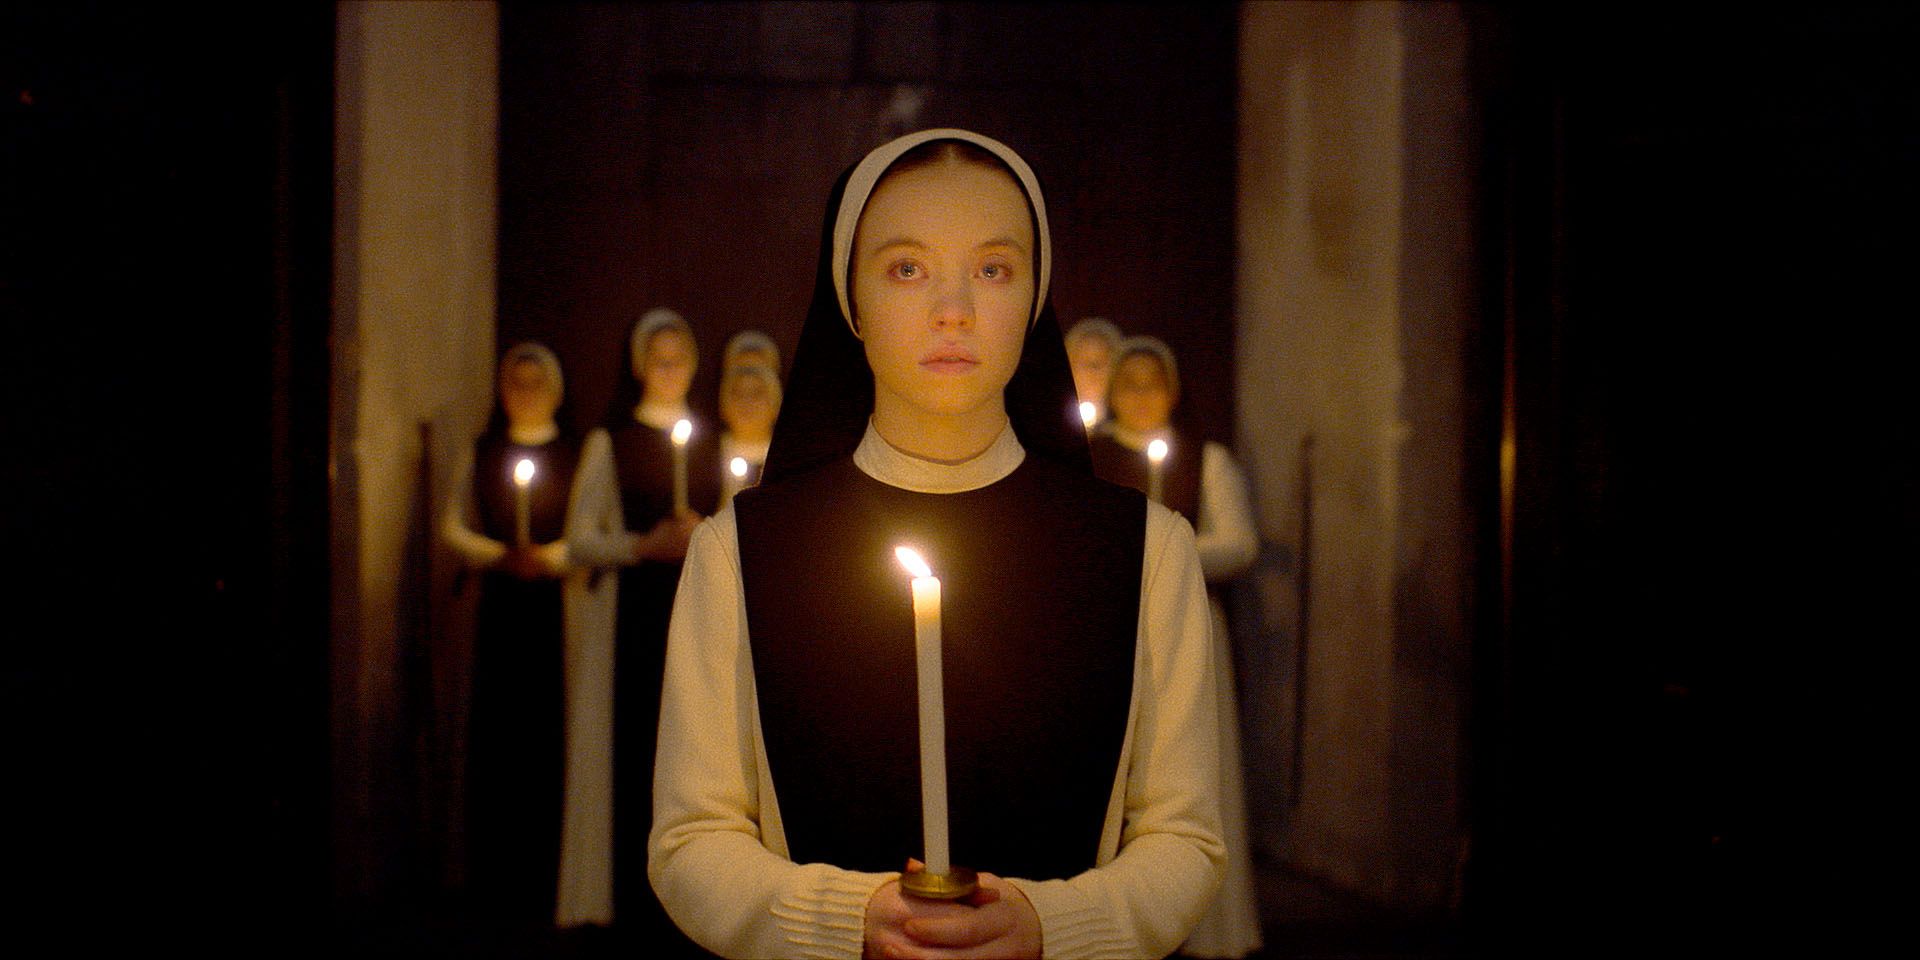 Sydney Sweeney stars in the new horror film "Immaculate."